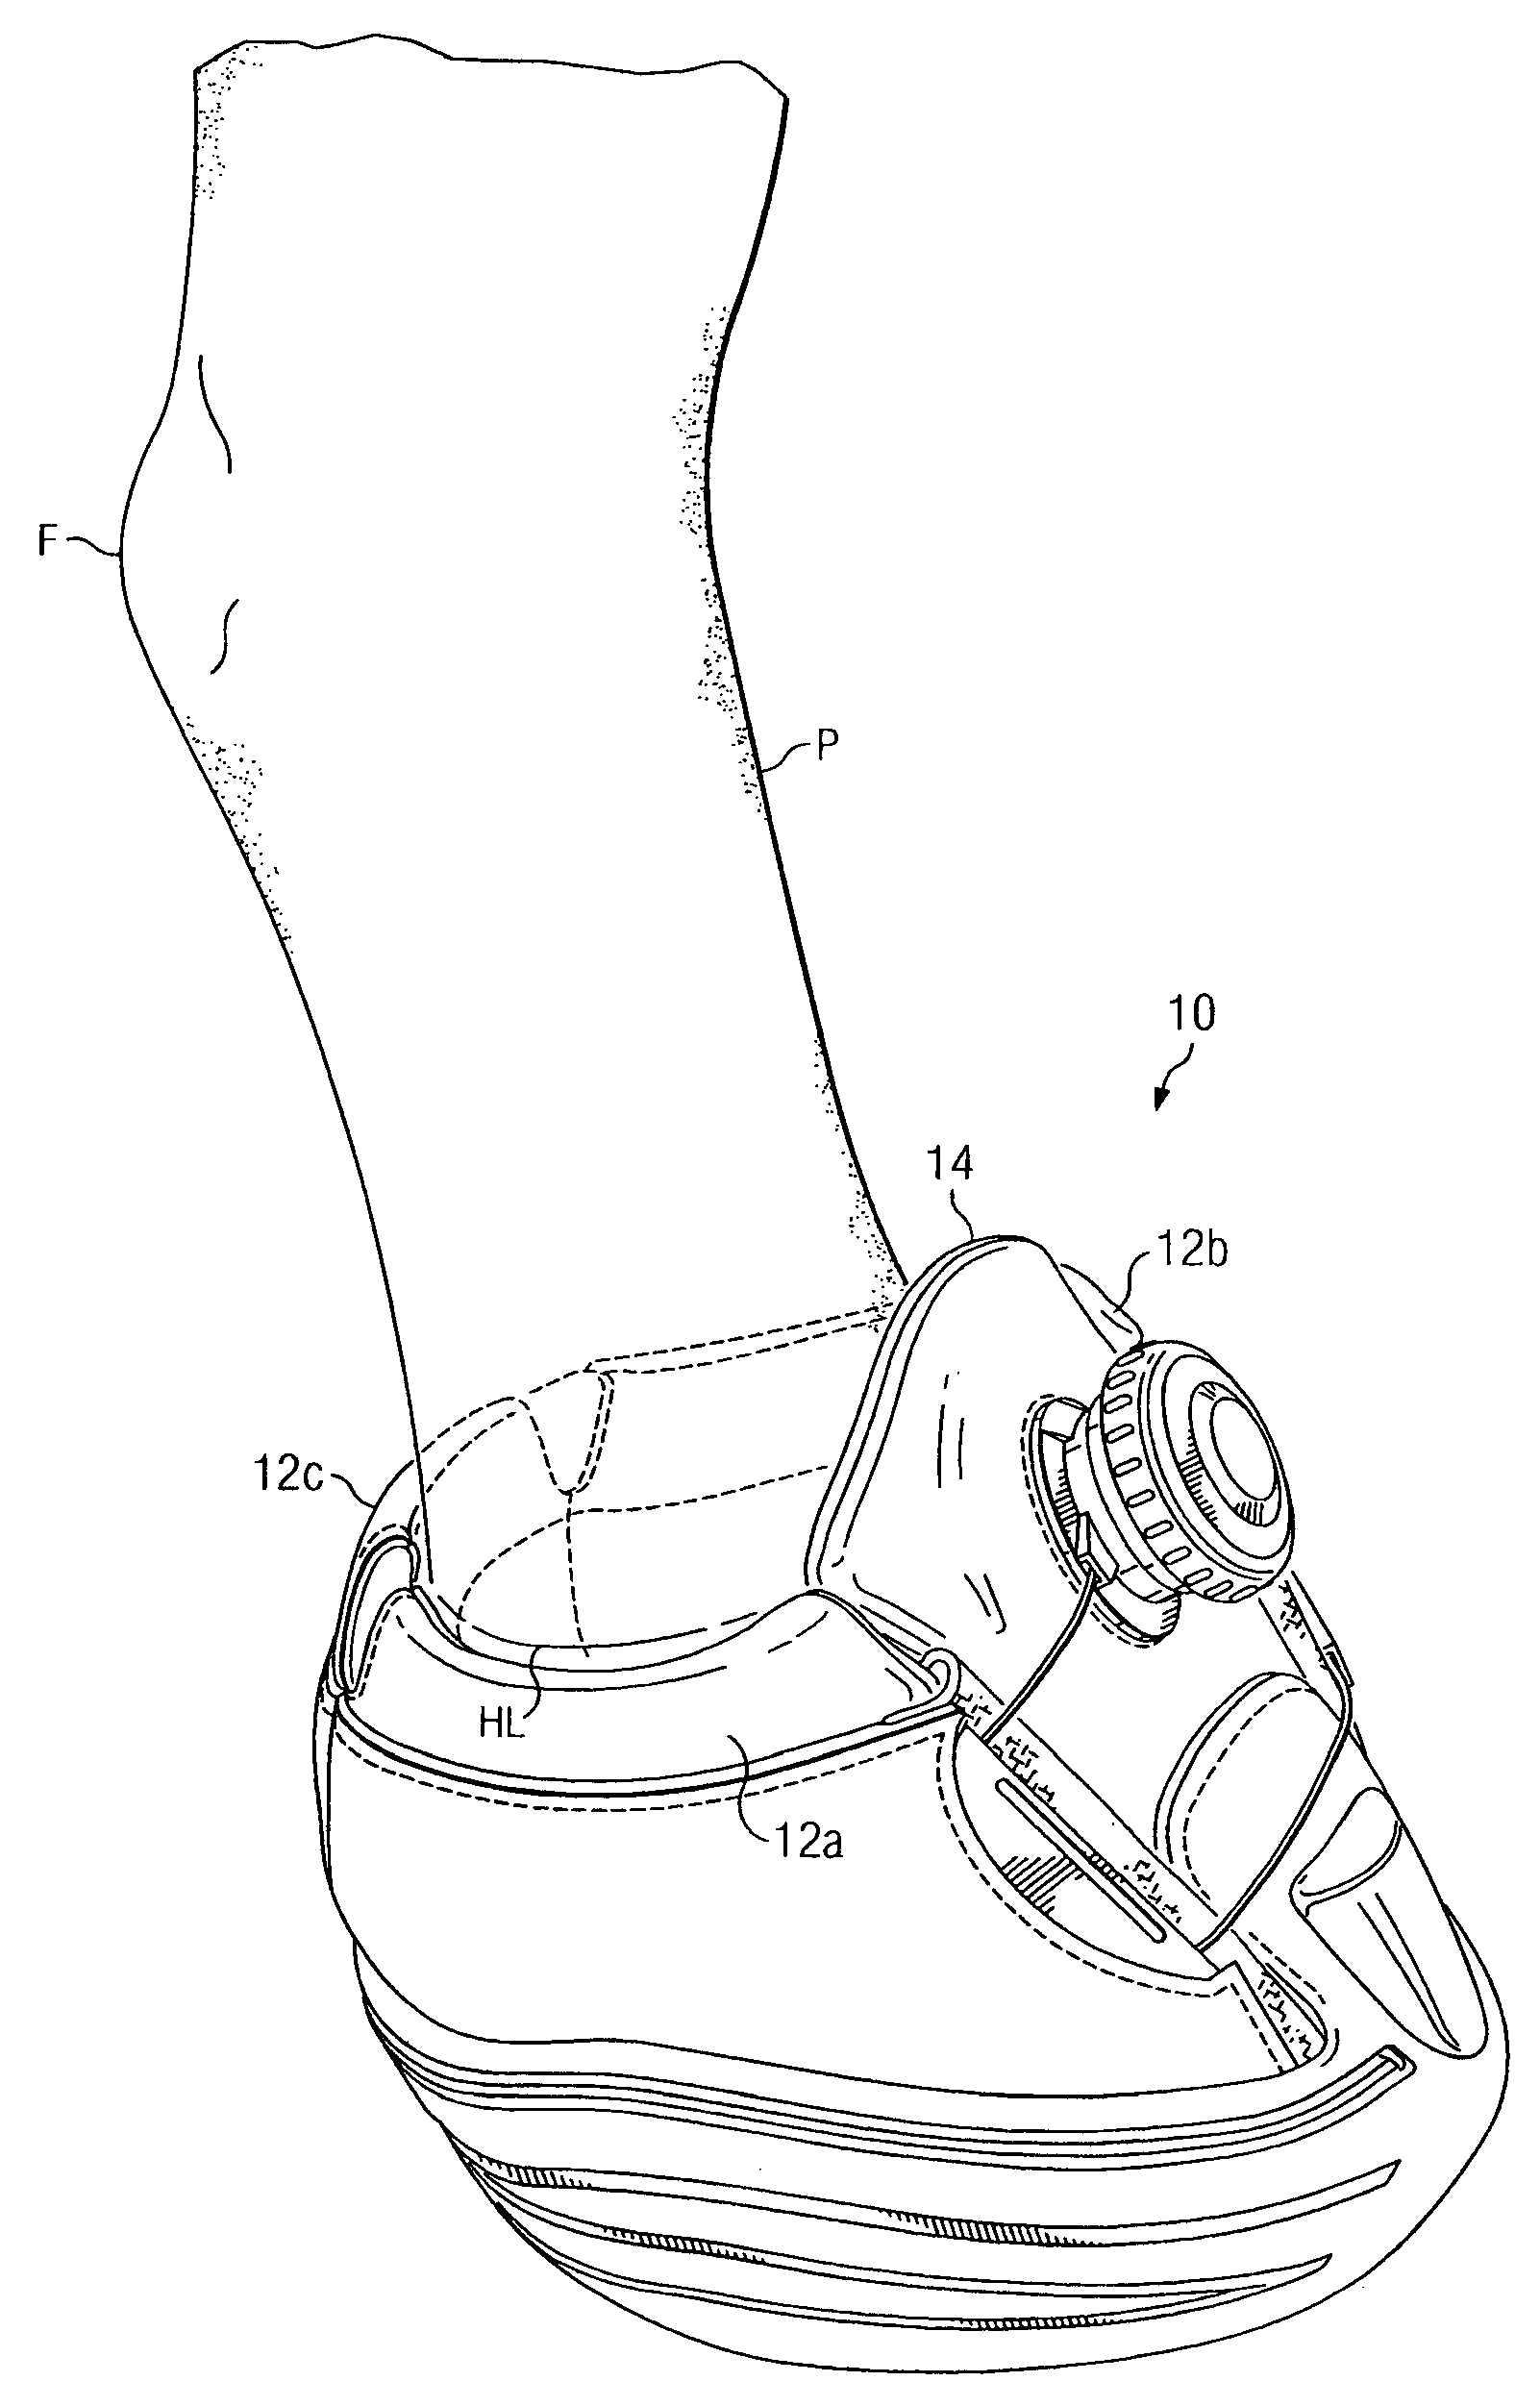 Horse boot sleeve for pastern protection